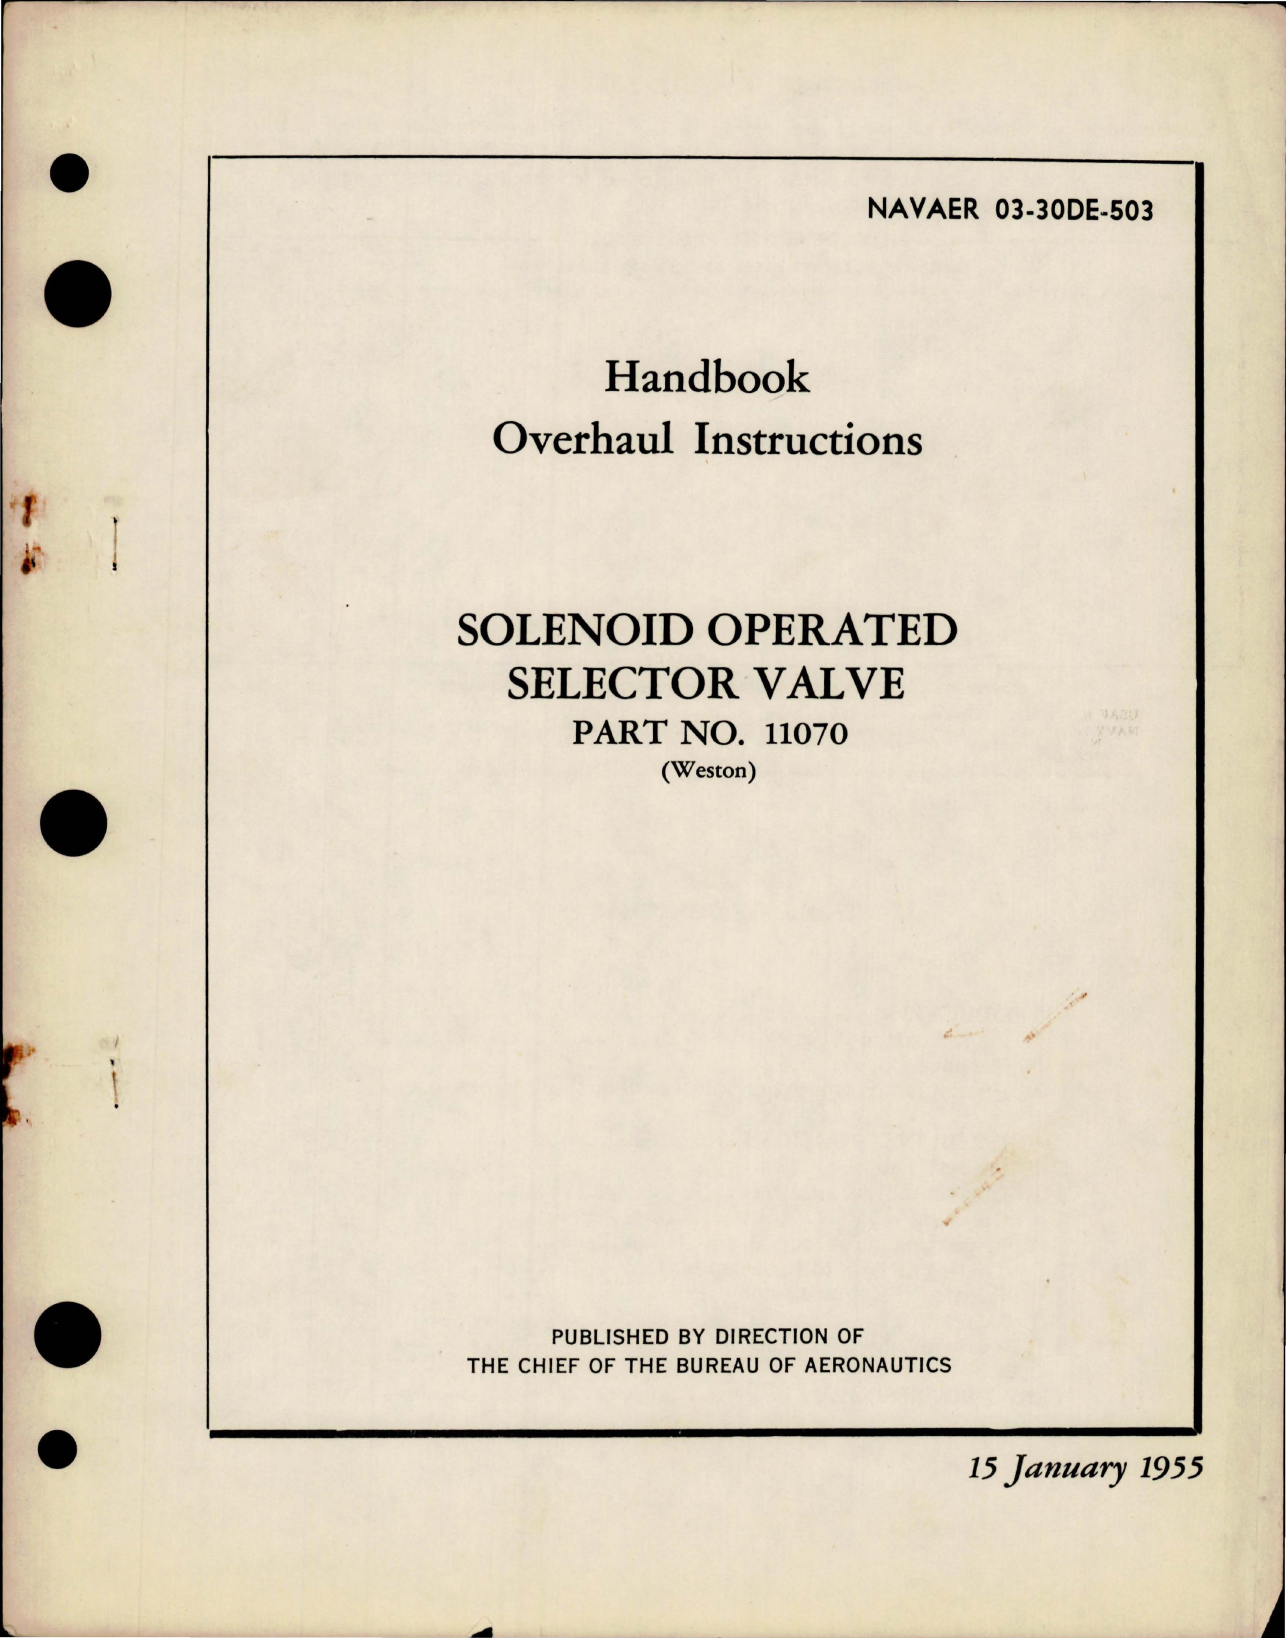 Sample page 1 from AirCorps Library document: Overhaul Instructions for Solenoid Operated Selector Valve - Part 11070